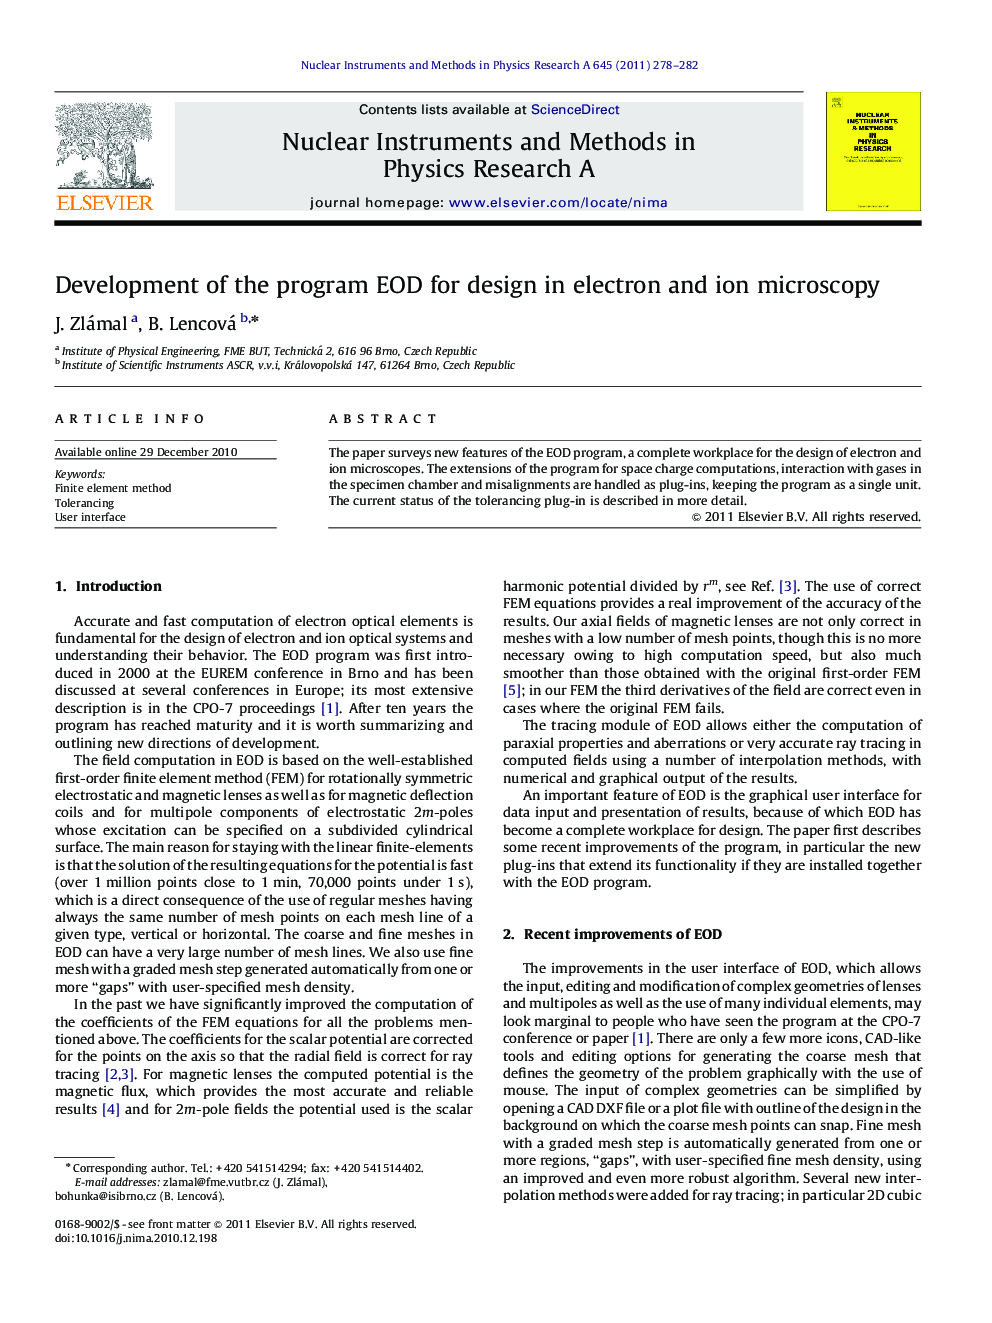 Development of the program EOD for design in electron and ion microscopy